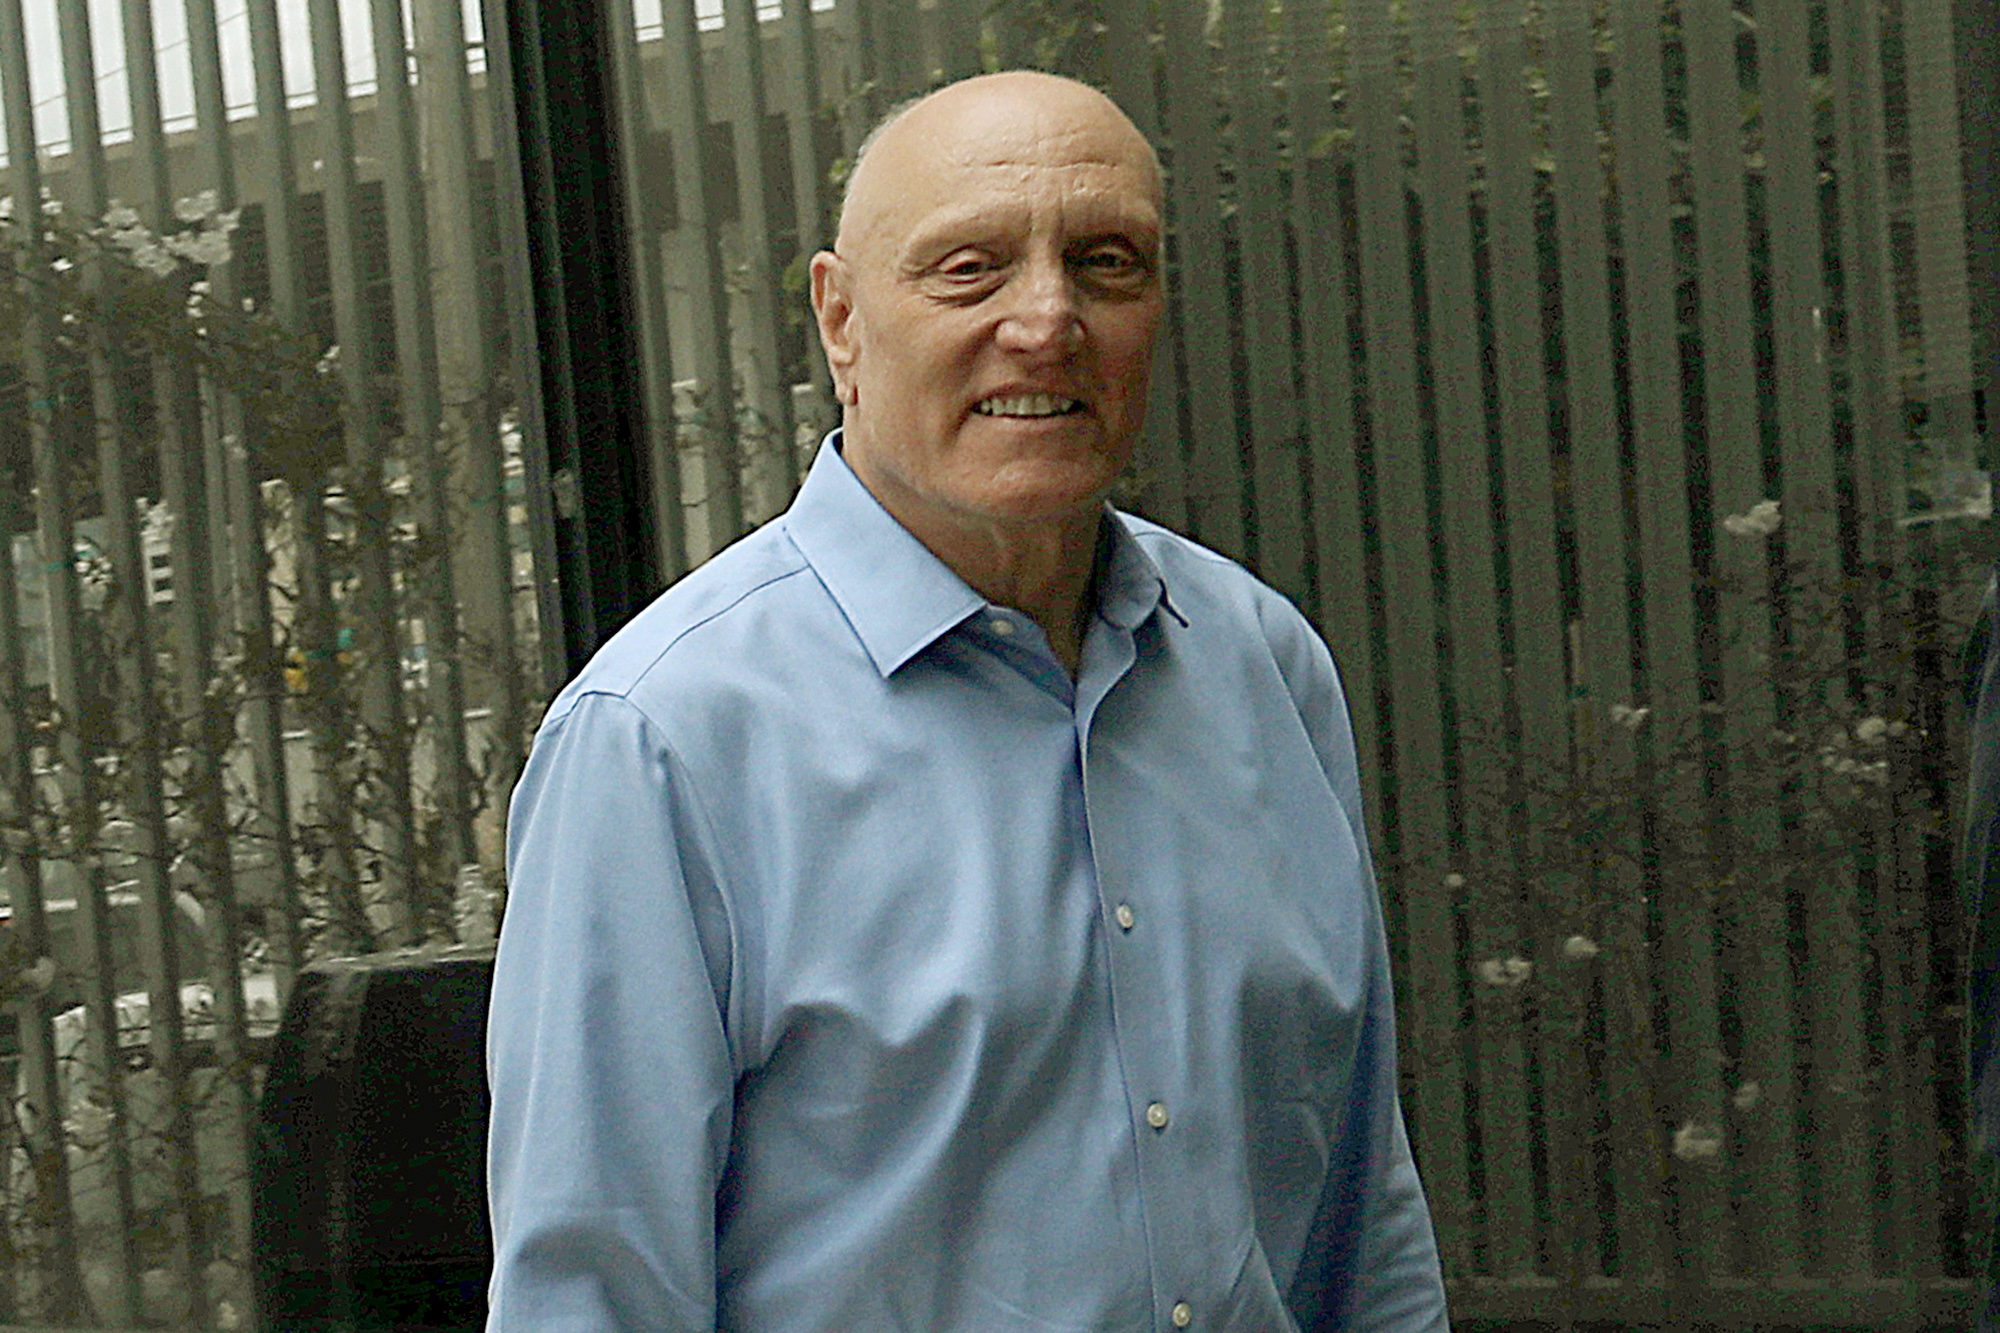 Paul Giusti poses for a photo wearing a blue button-down.